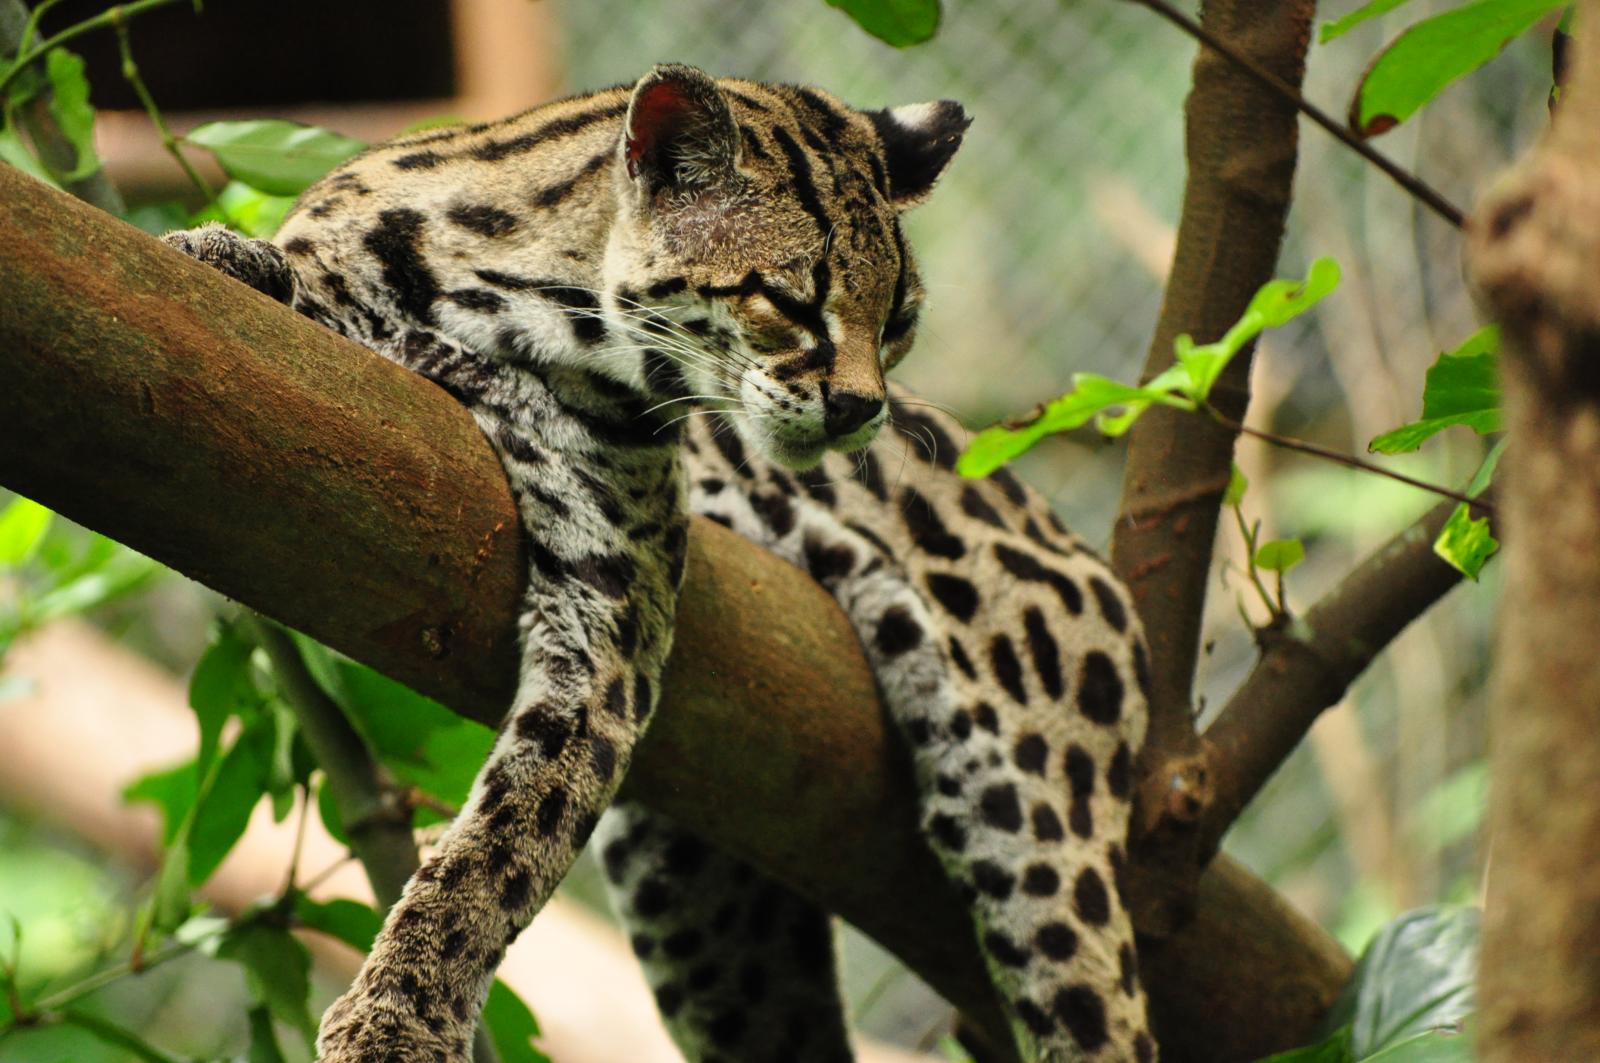 Animal Galleries, picture of animals from around the world. Wild Cats. Margay Photo Gallery. Margay Cat Photo lying tree